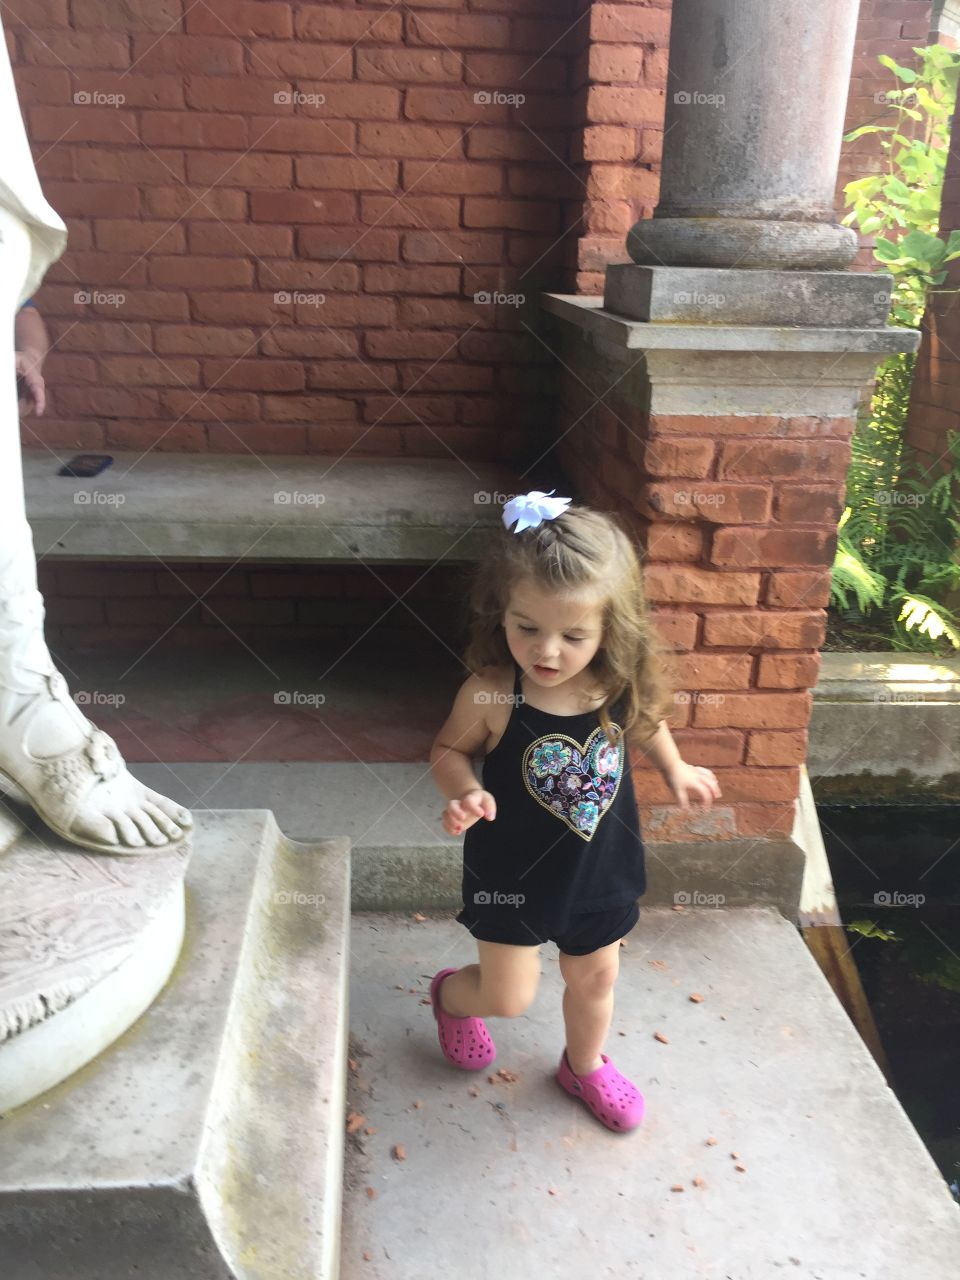 Cool statue and the best toddler ever